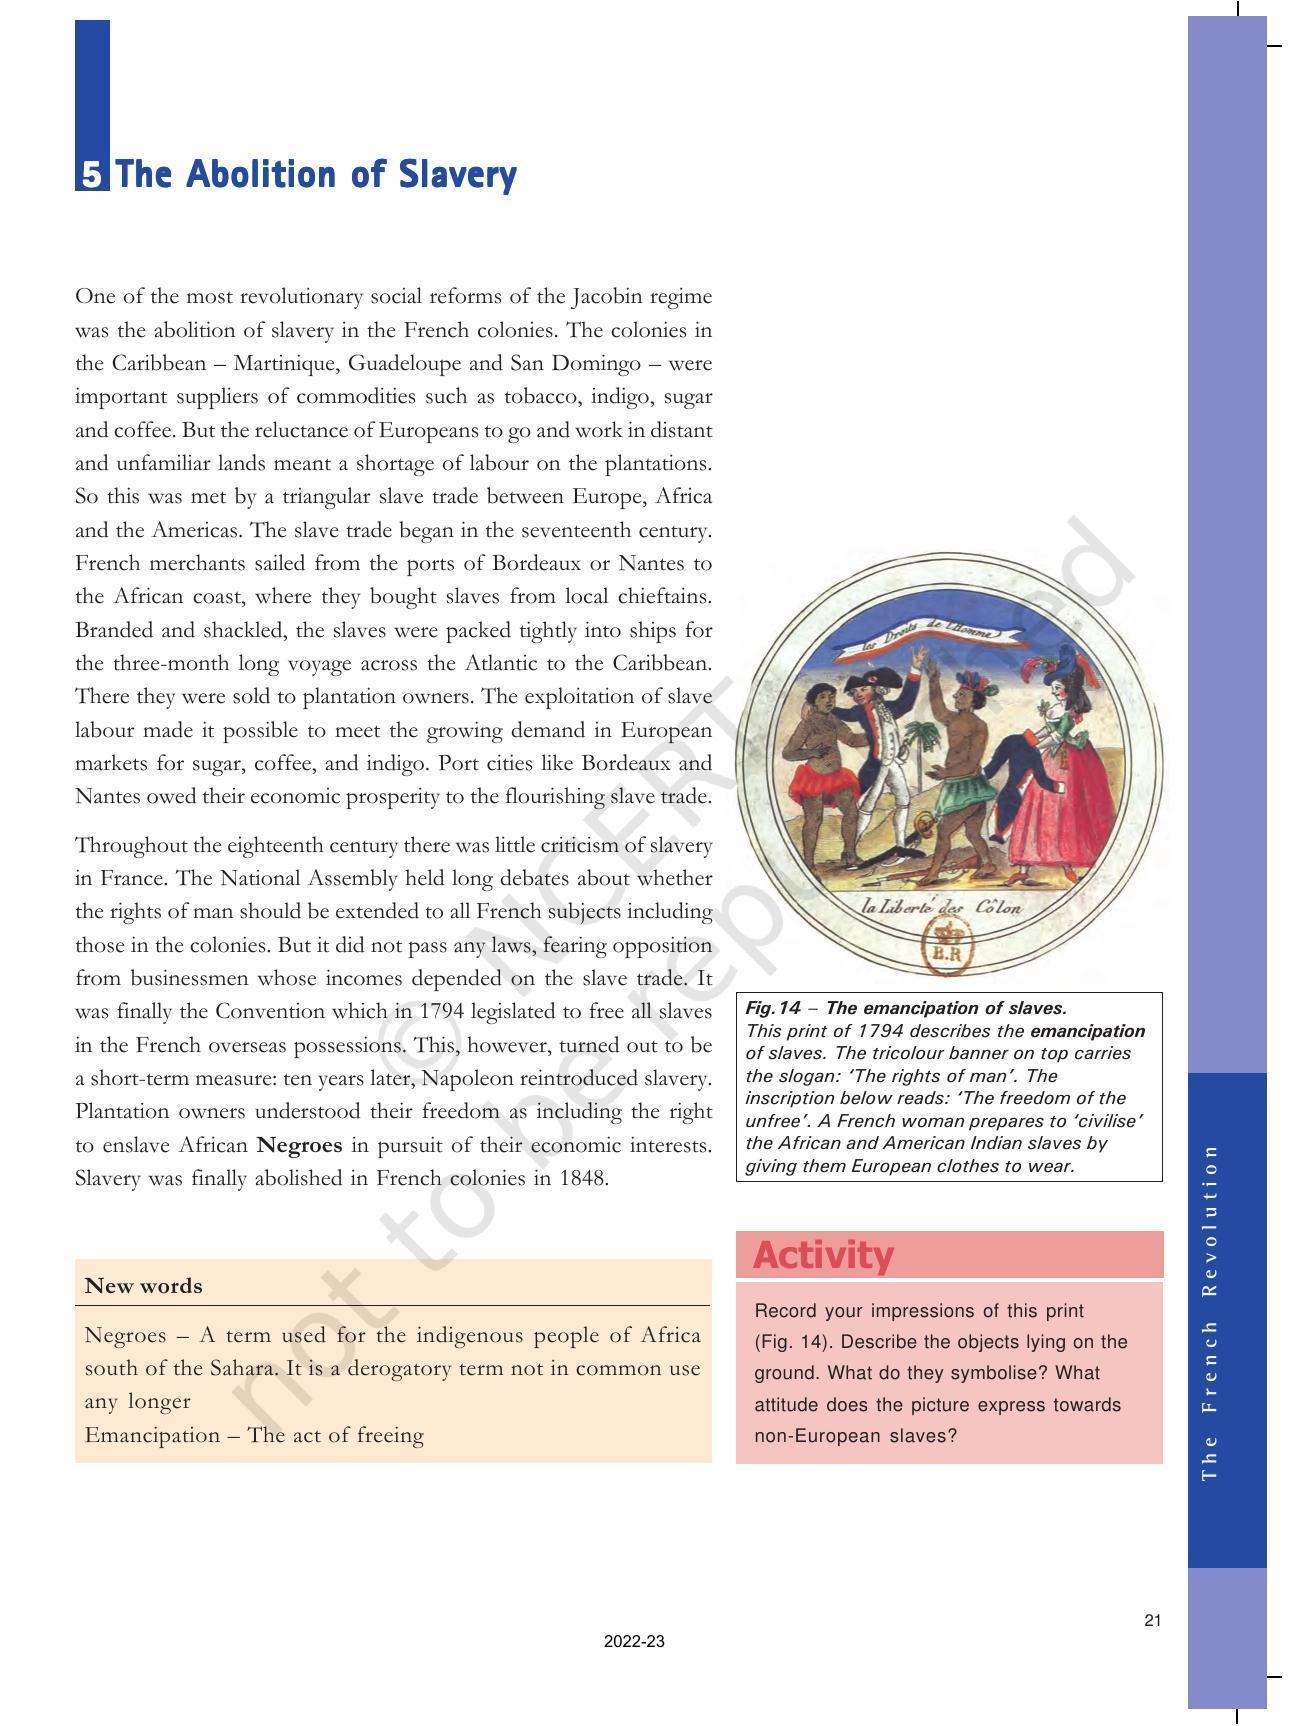 NCERT Book for Class 9 History Chapter 1 The French Revolution - Page 21